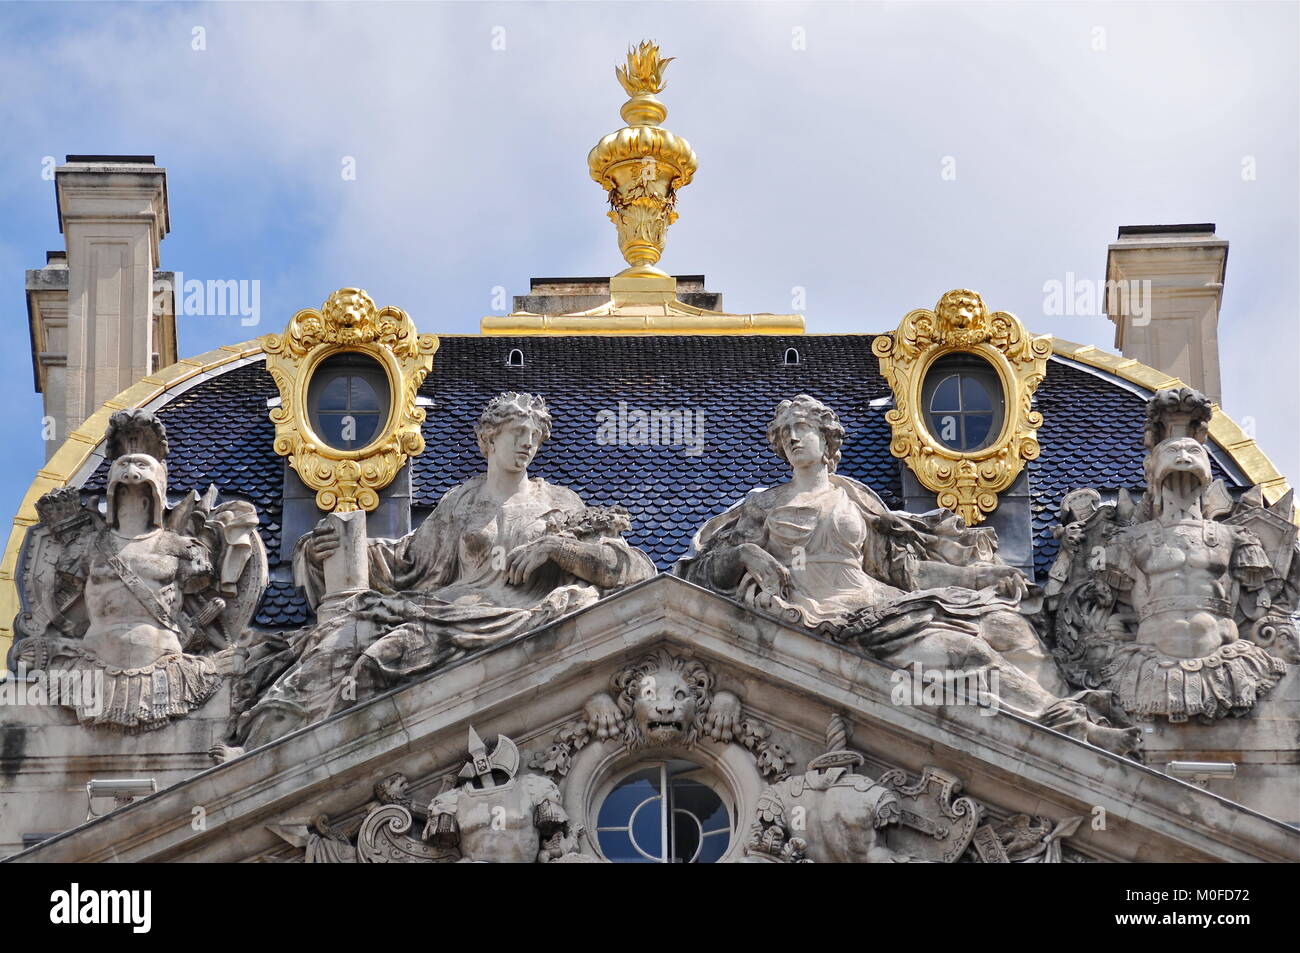 The Golden ornaments of Central Townhall, Lyon, france Stock Photo